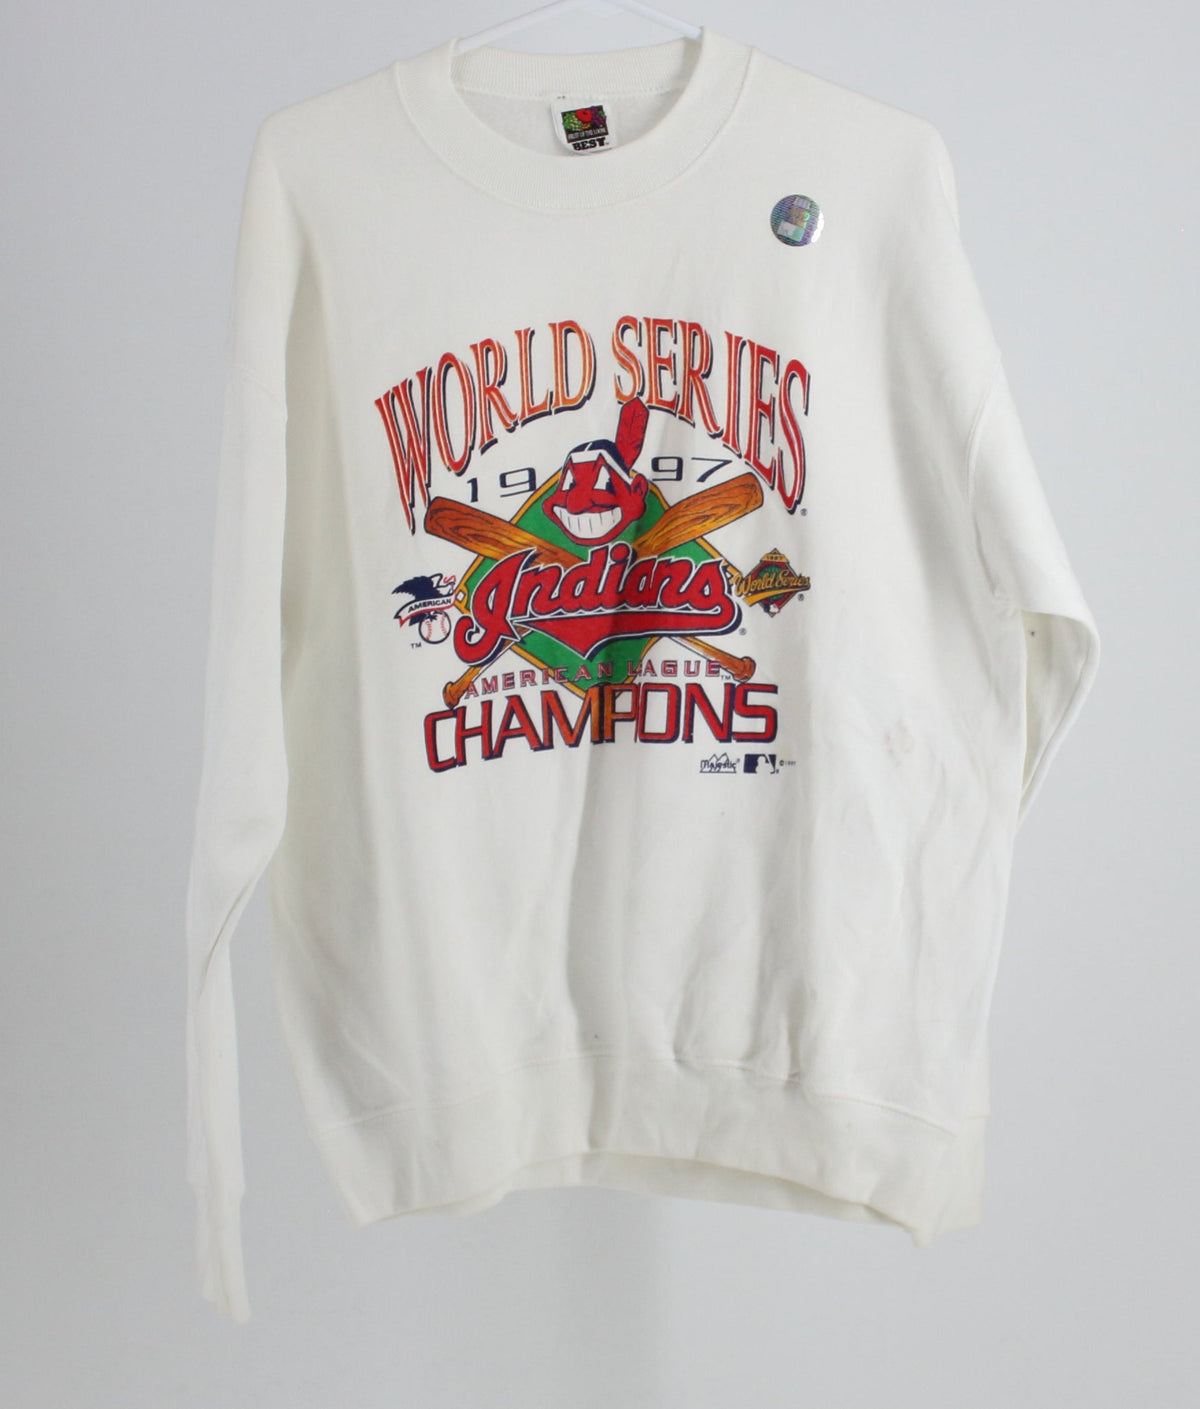 Fruit of the Loom World Series Indians American League Champions Crew Neck